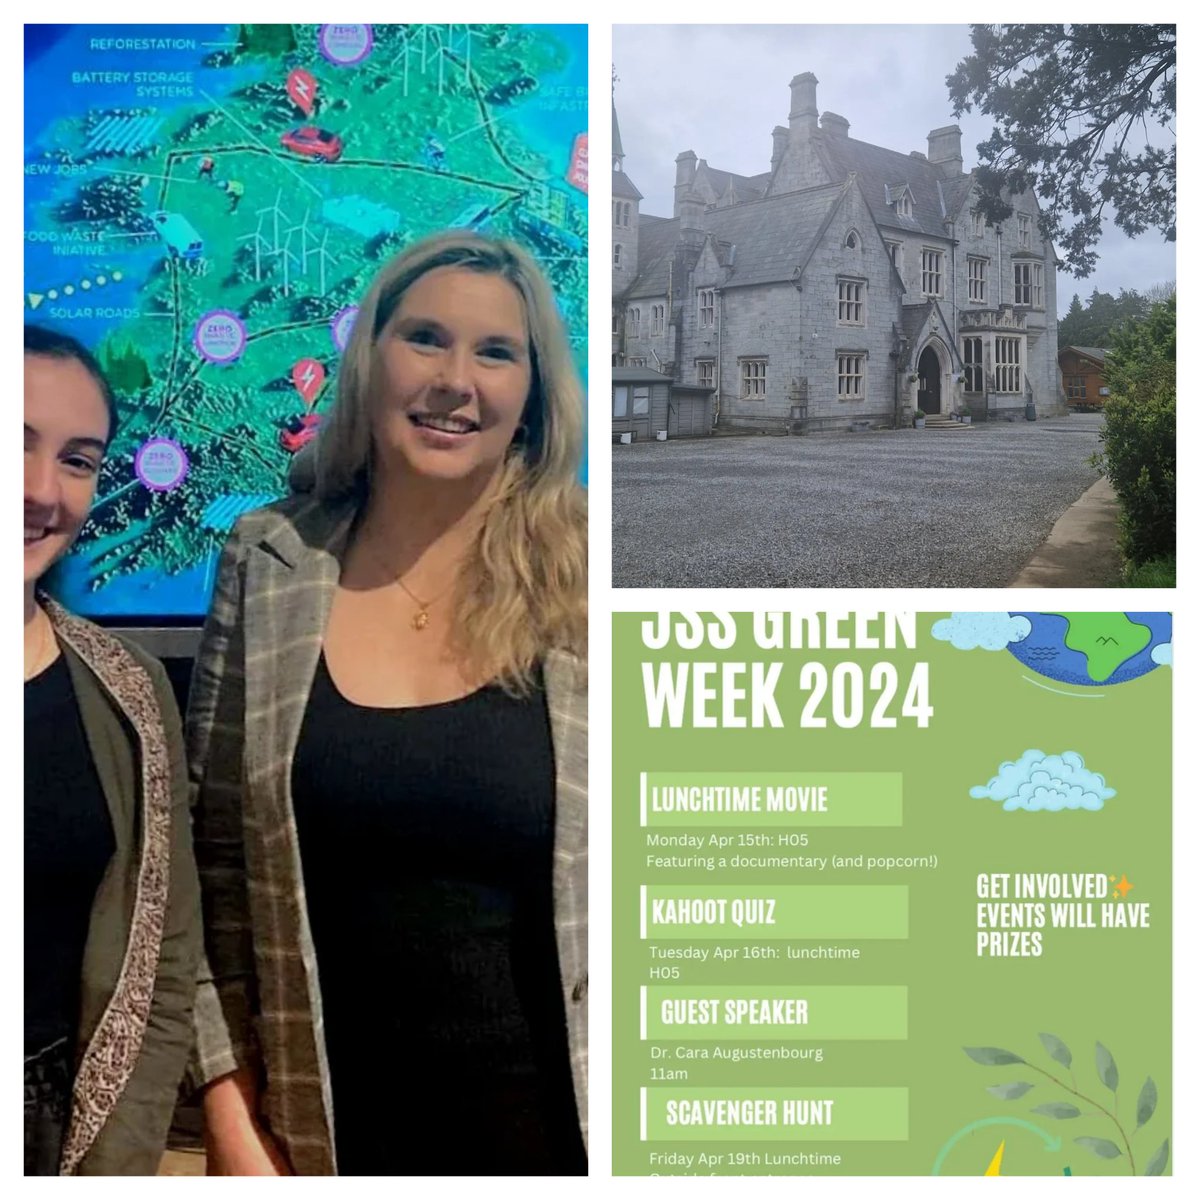 A treat for me to get to spend some time at beautiful John Scottus School Old Conna for their #GreenWeek, talking all things climate & environment. 💚